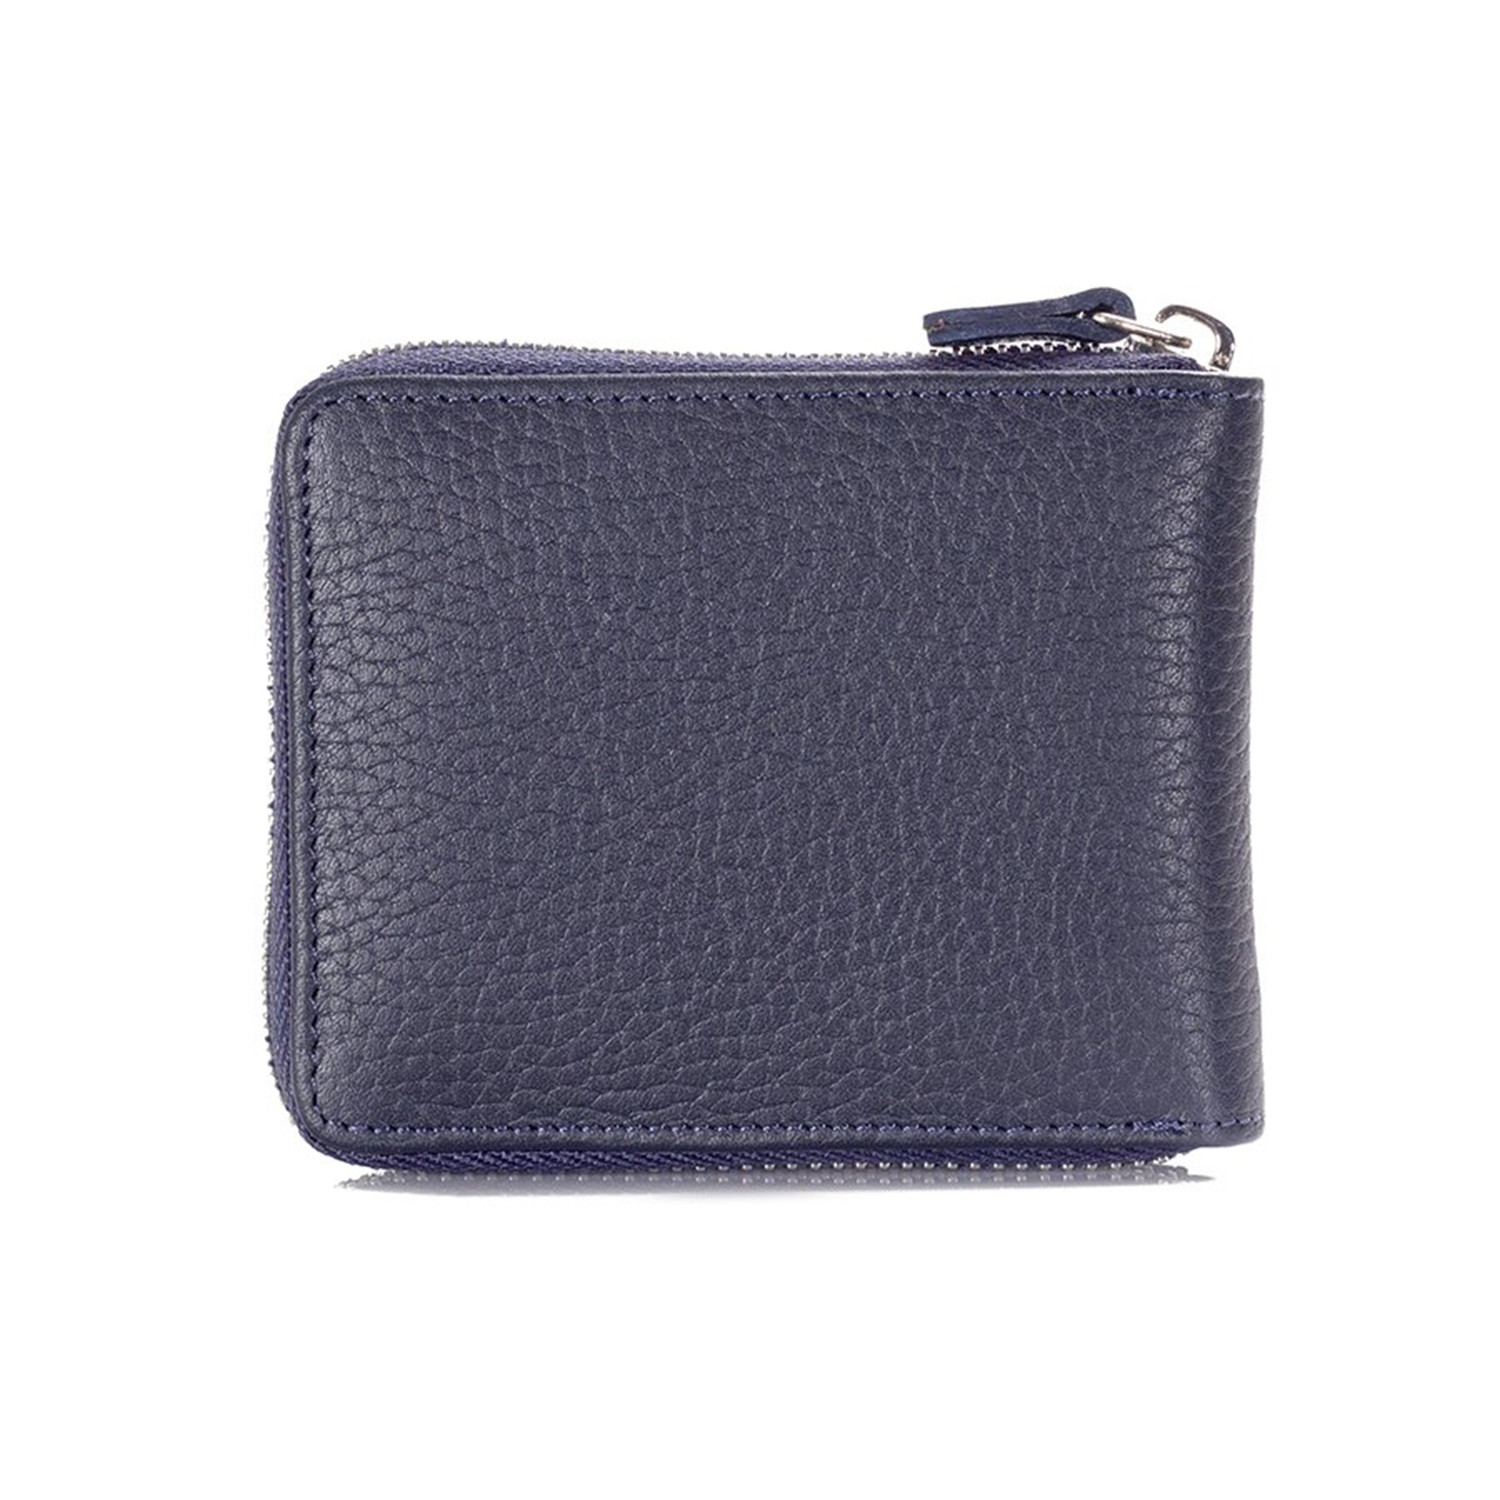 Zippered Wallet With Pocket For Coins // Navy Blue - Deriza-Guzini ...